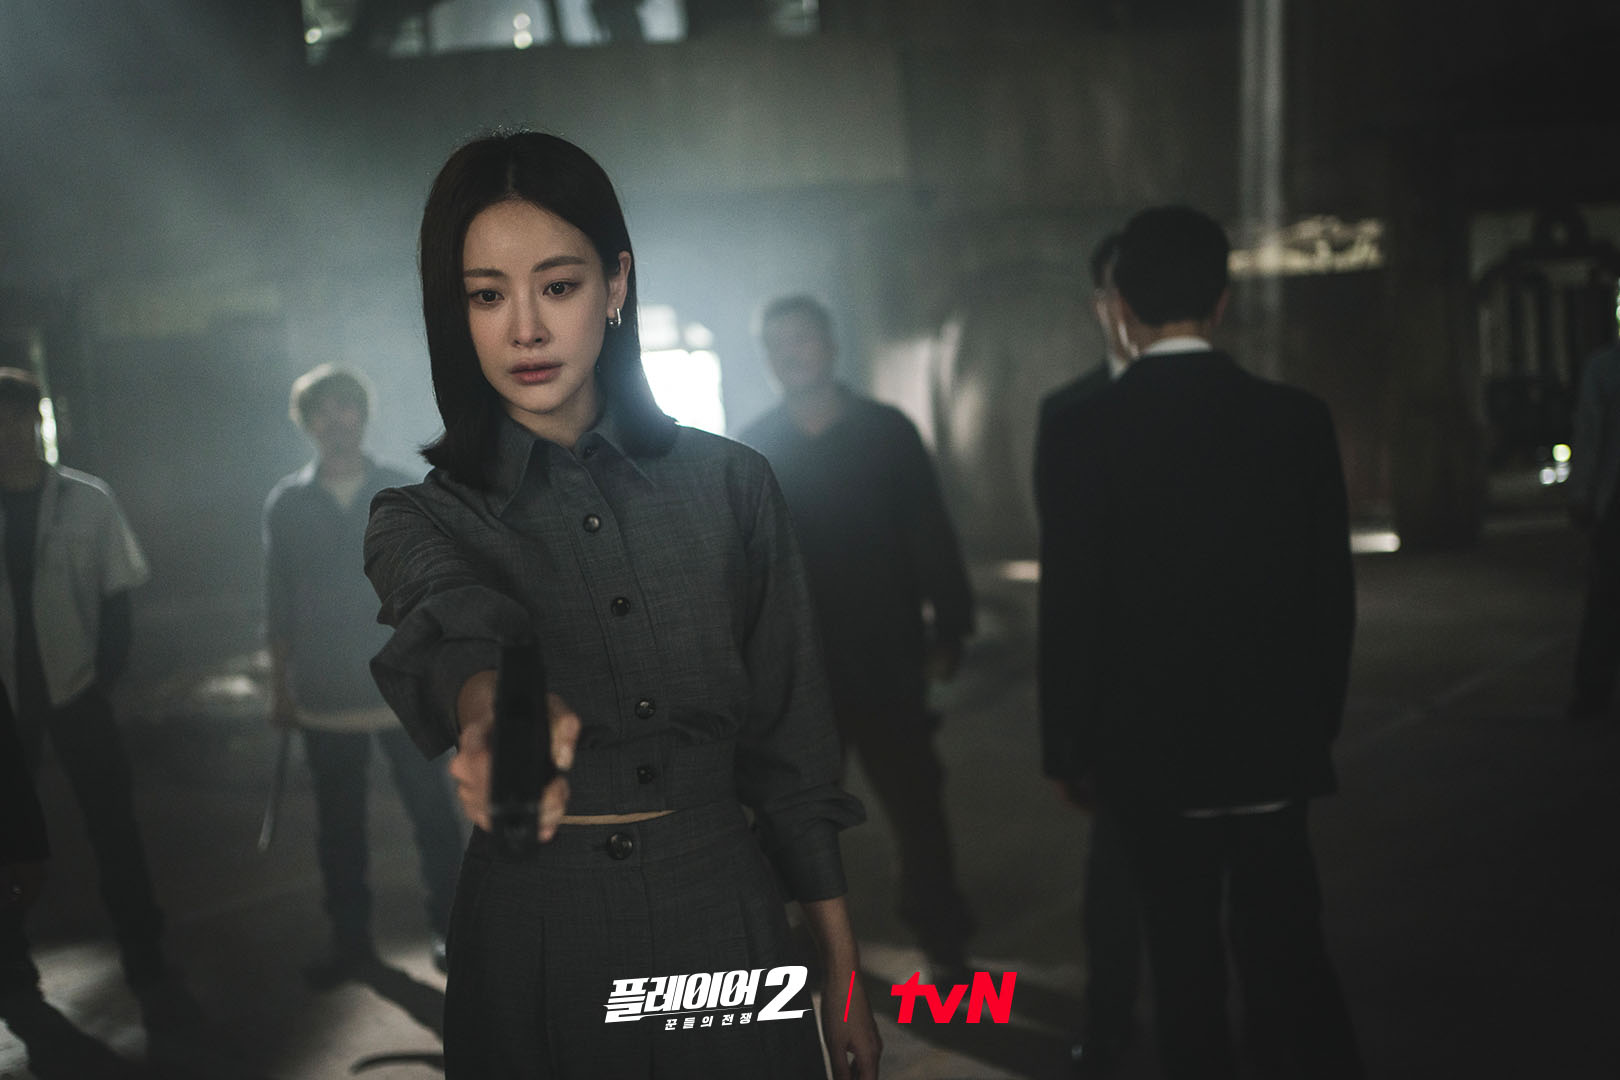 Oh Yeon Seo Is A Mysterious Figure With Hidden Agenda In 